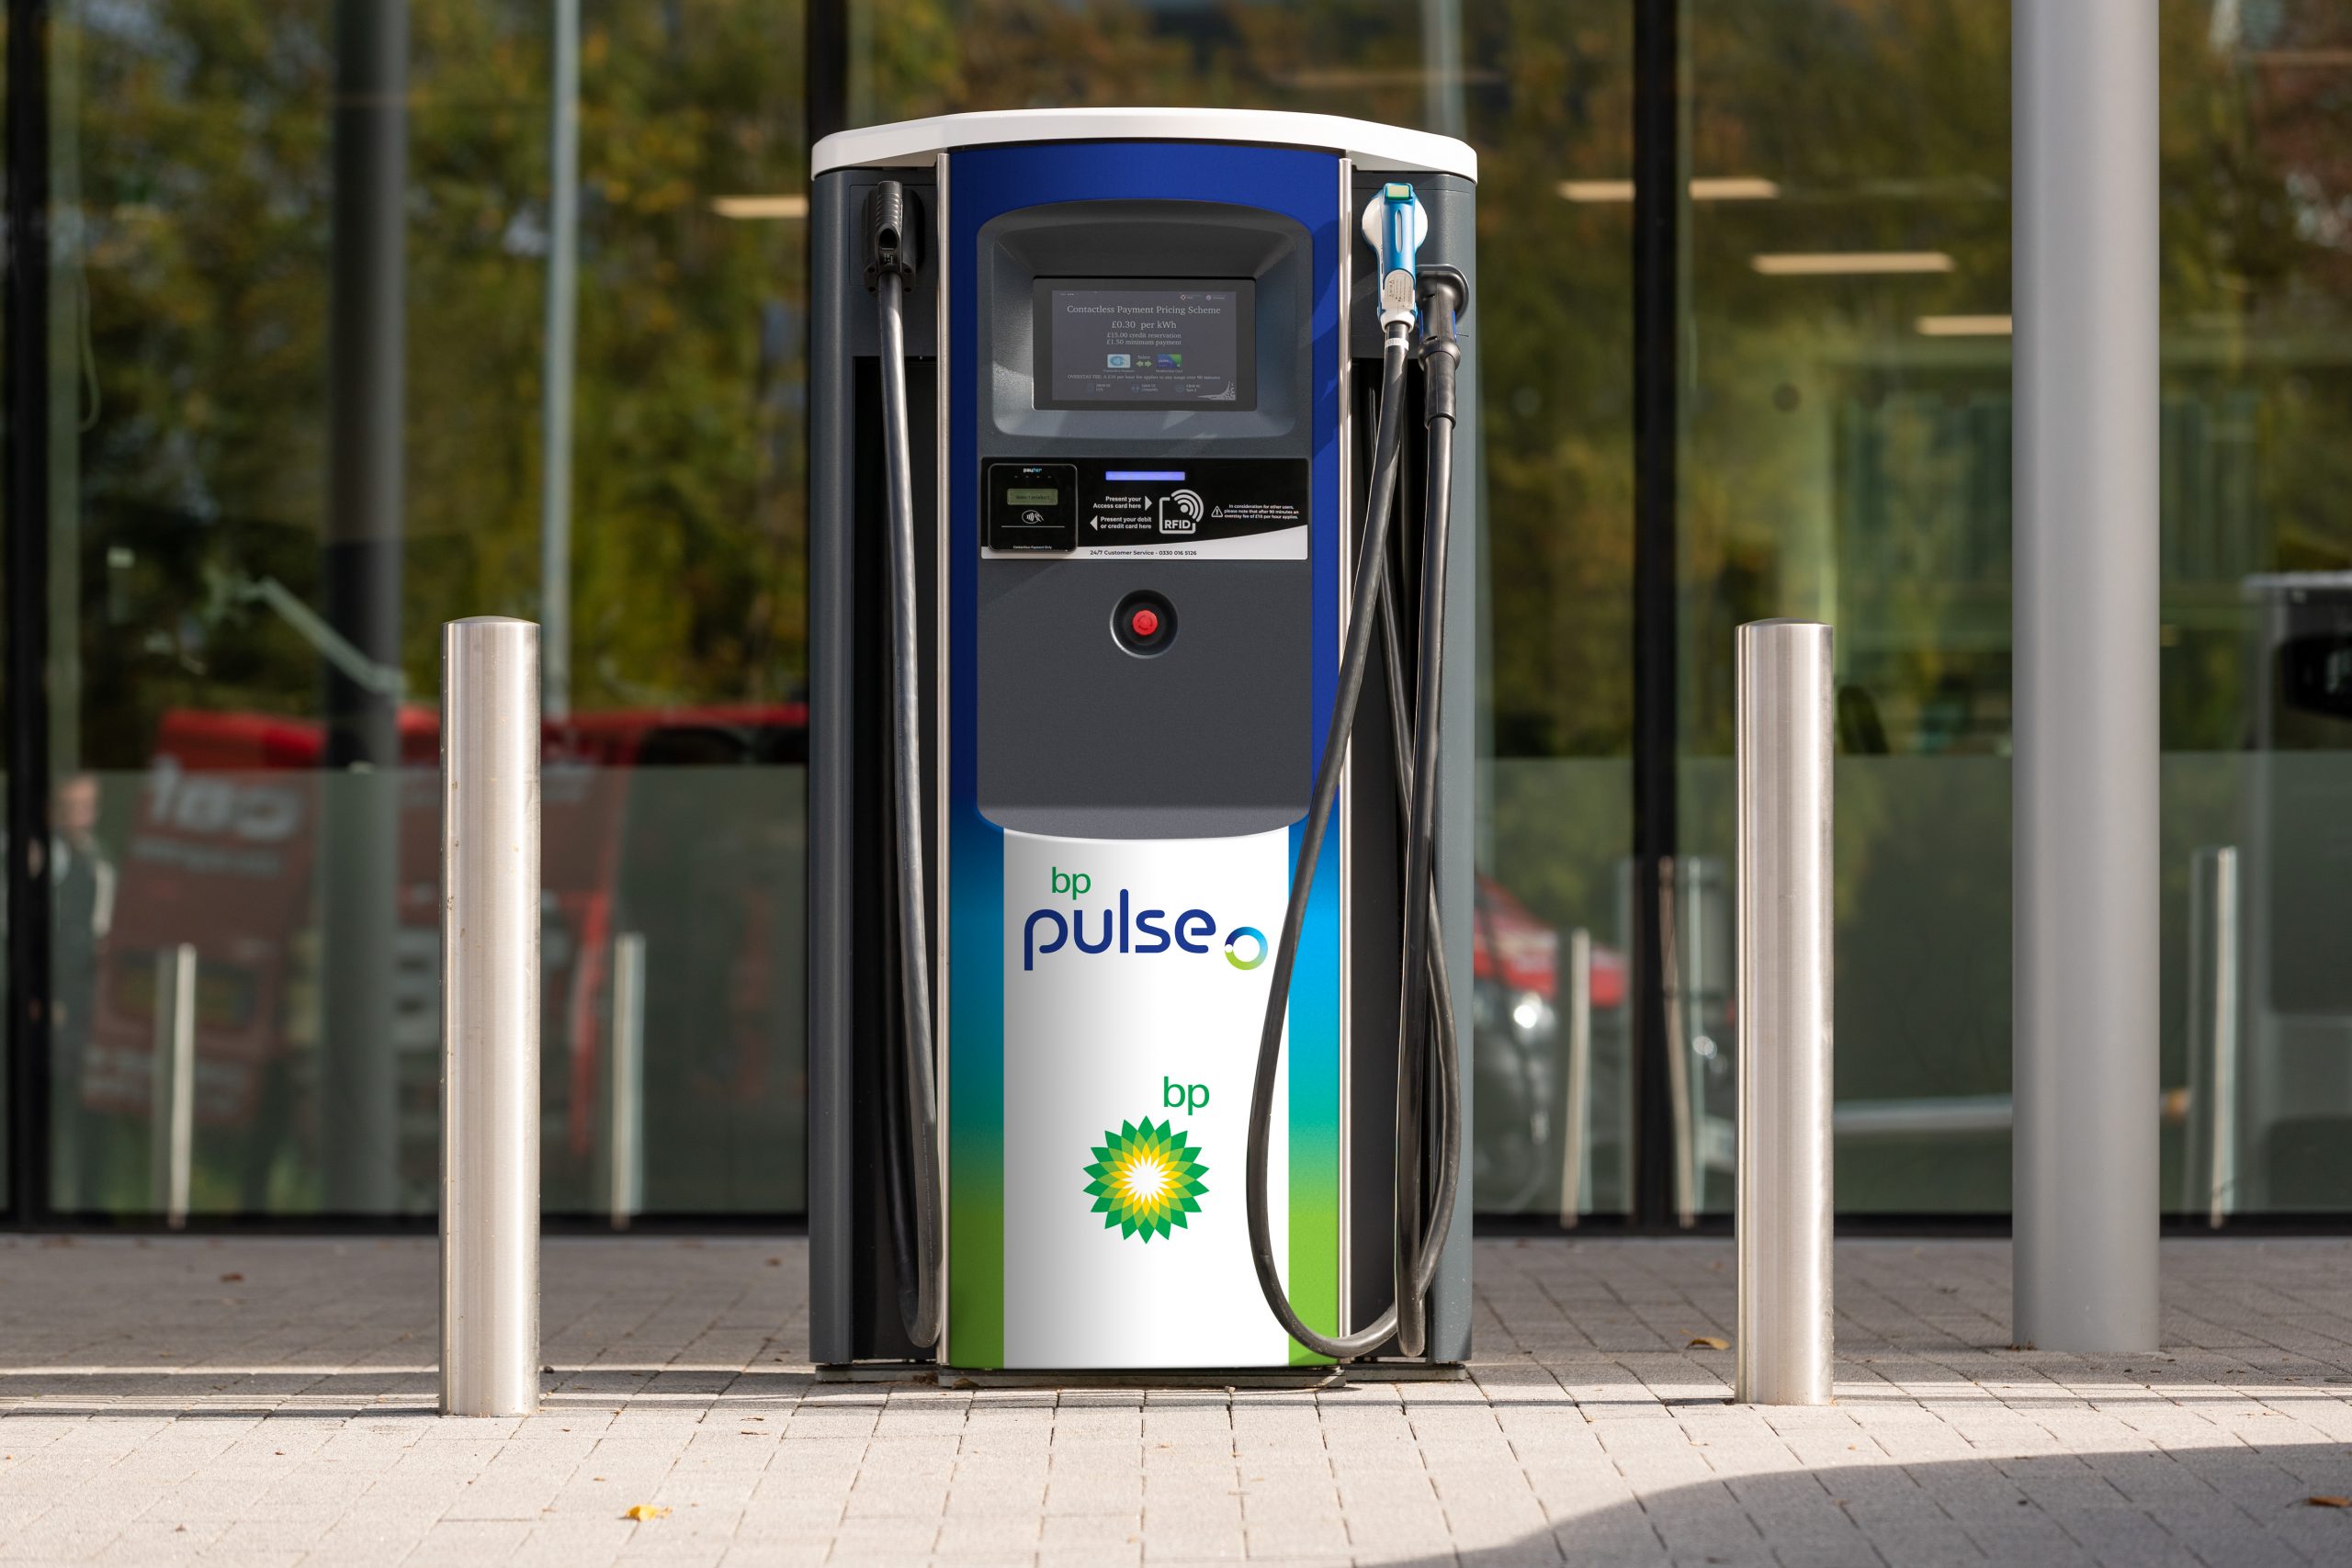 Top 5 Public charging networks - Spring 2022